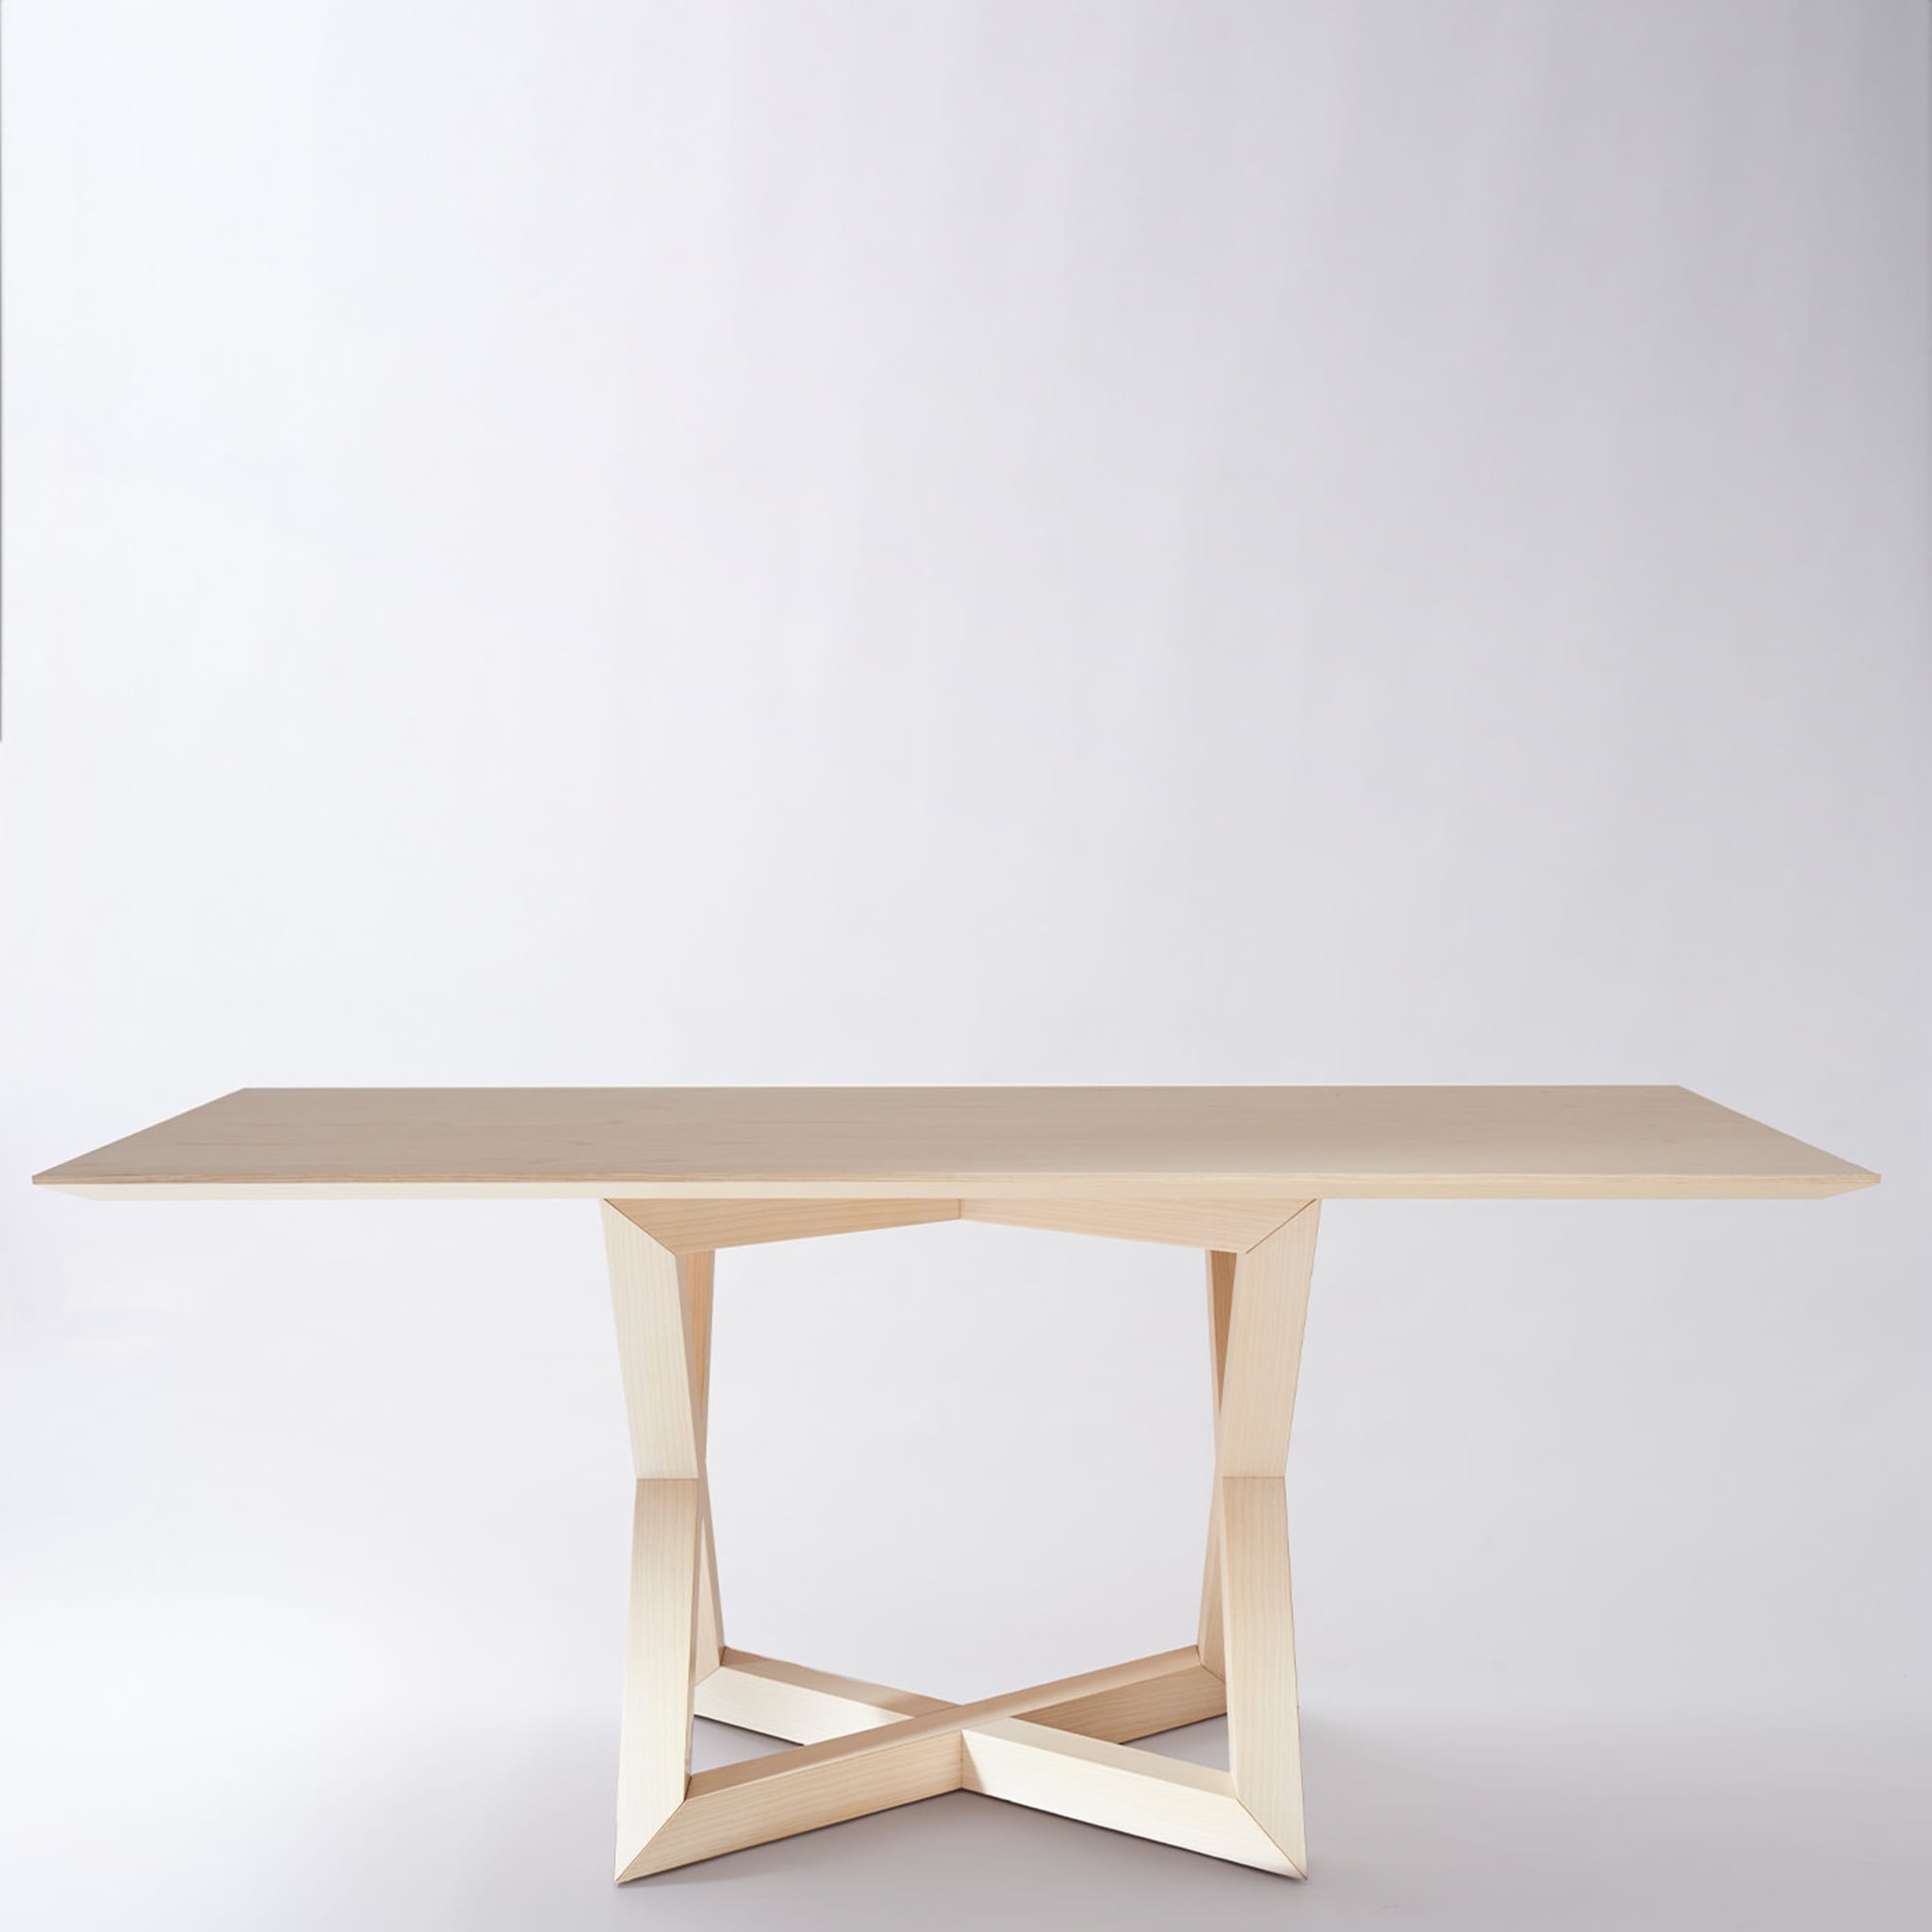 RK Wooden Dining Table by Antonio Saporito - Alternative view 2